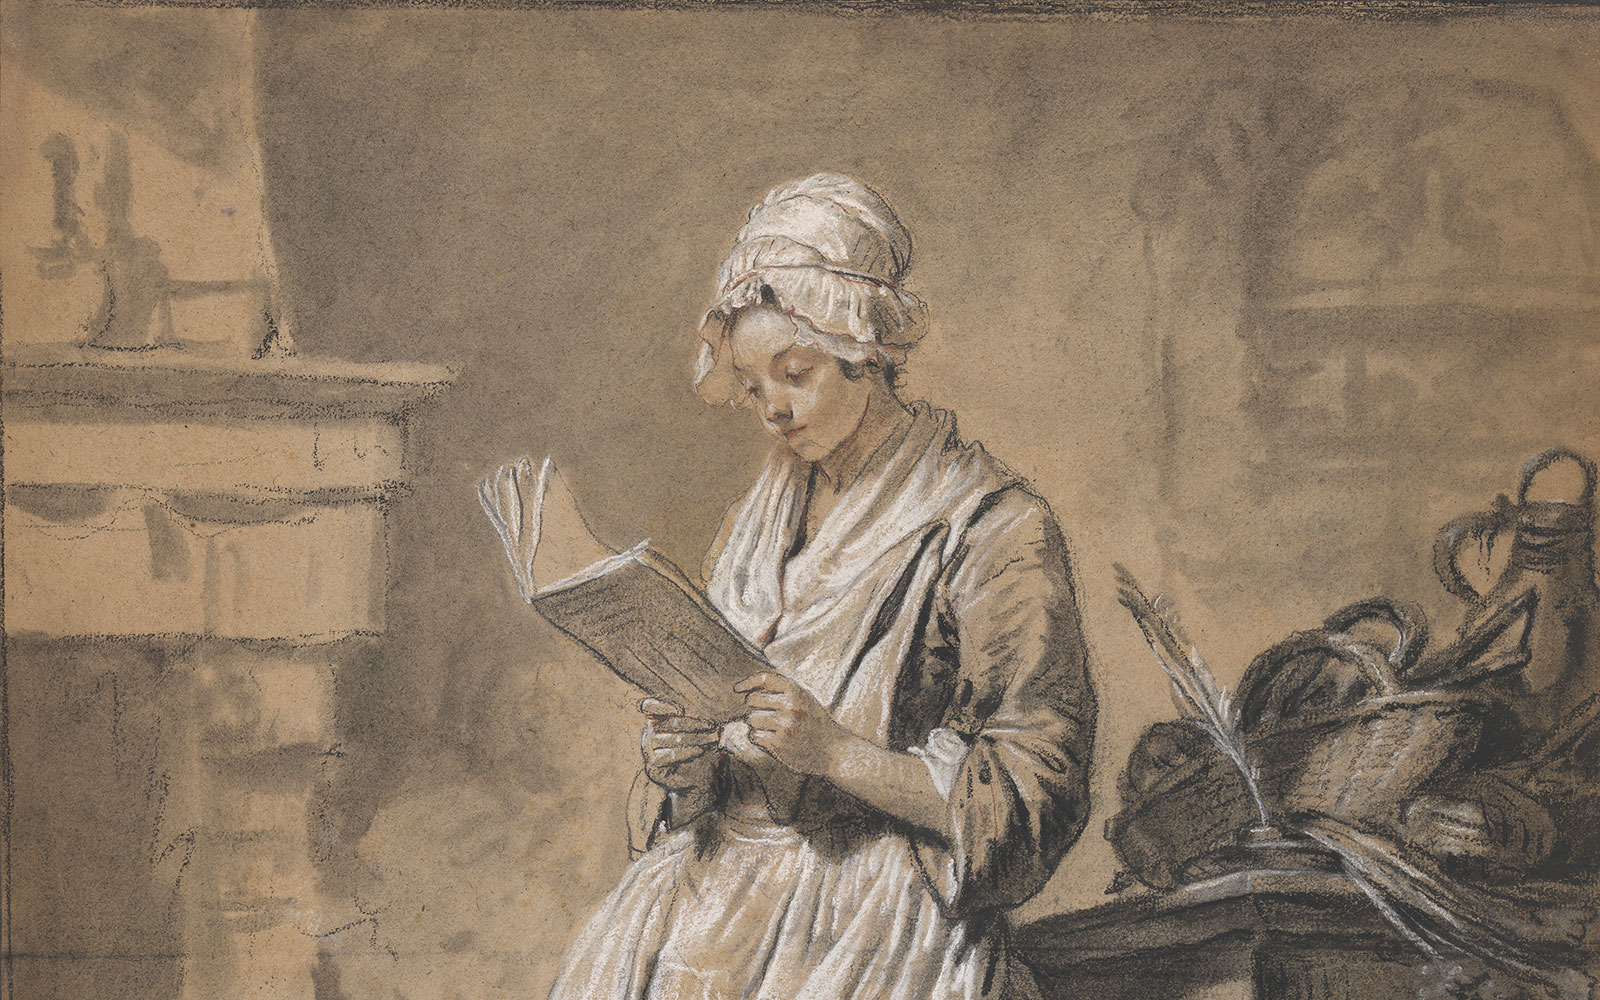 Drawing of a woman reading a book wearing a white bonnet.